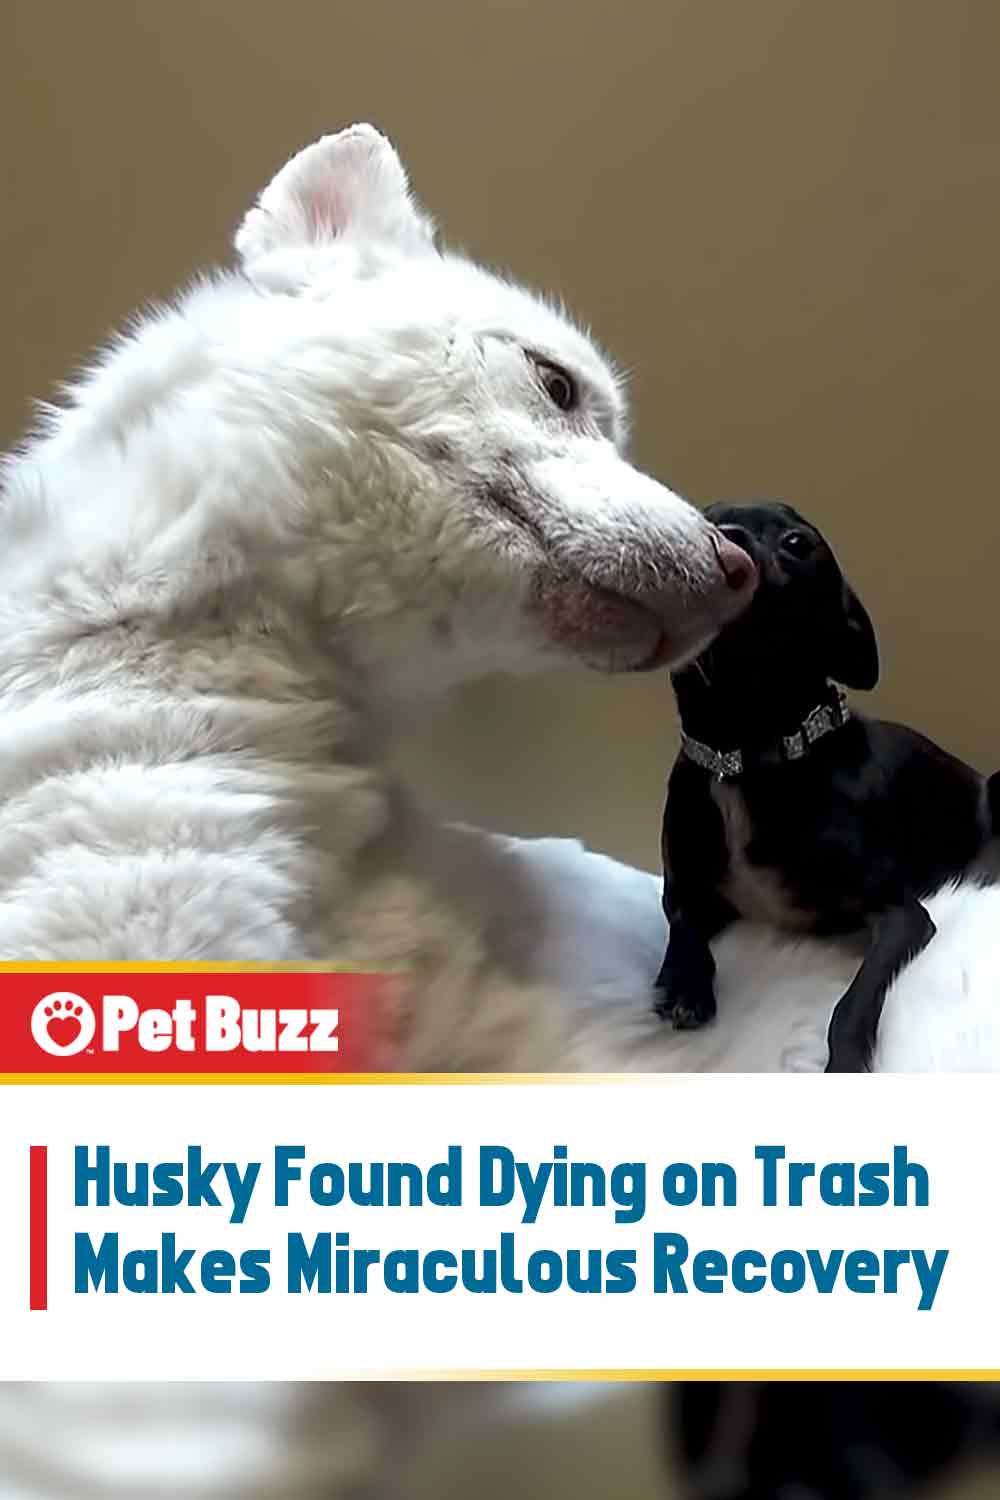 Husky Found Dying on Trash Makes Miraculous Recovery